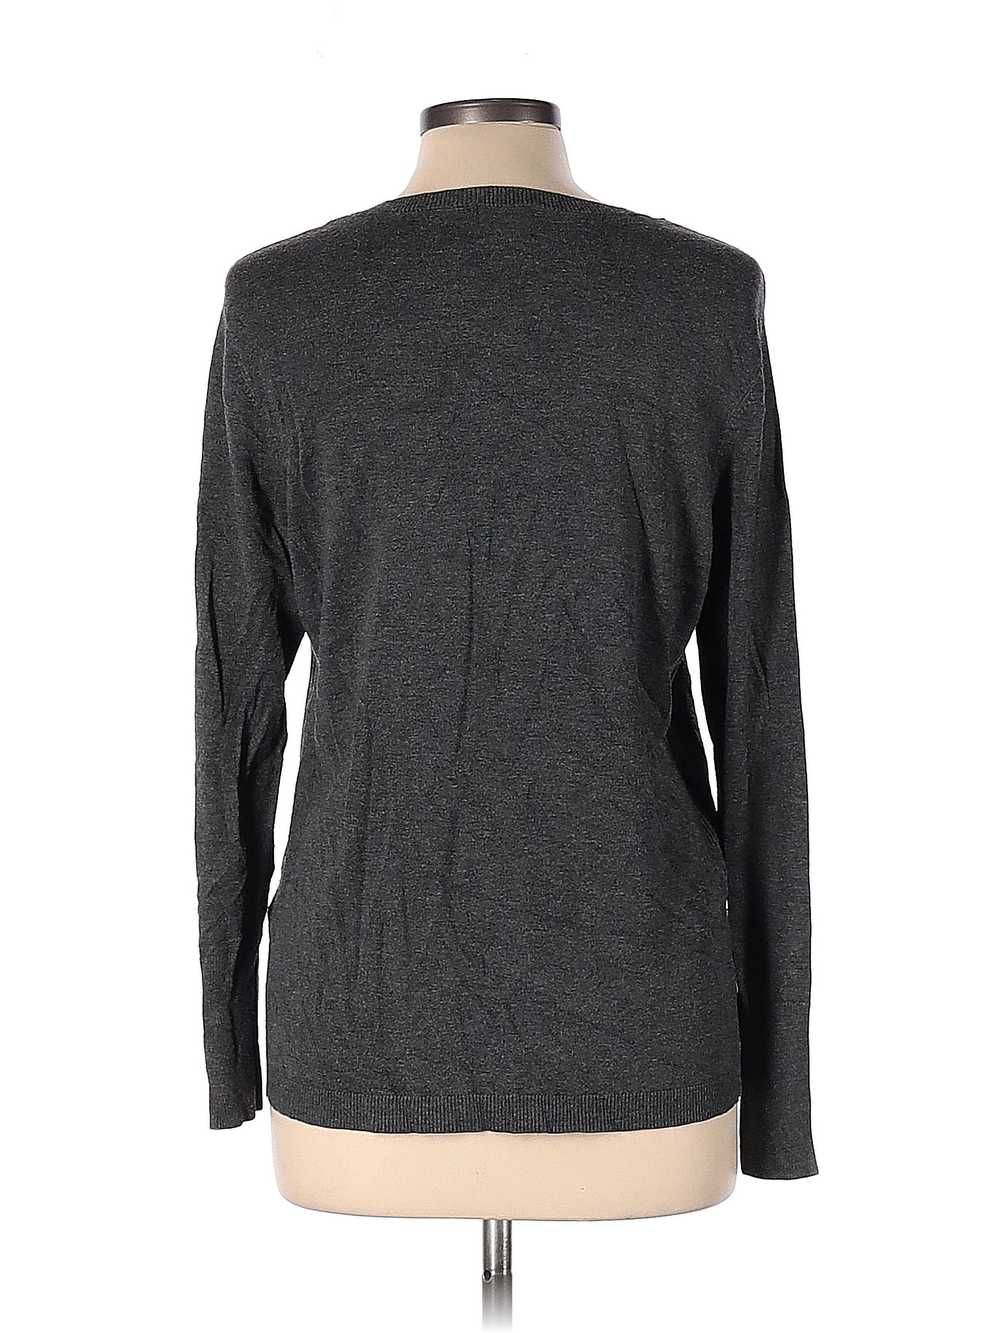 JM Collection Women Gray Pullover Sweater L - image 2